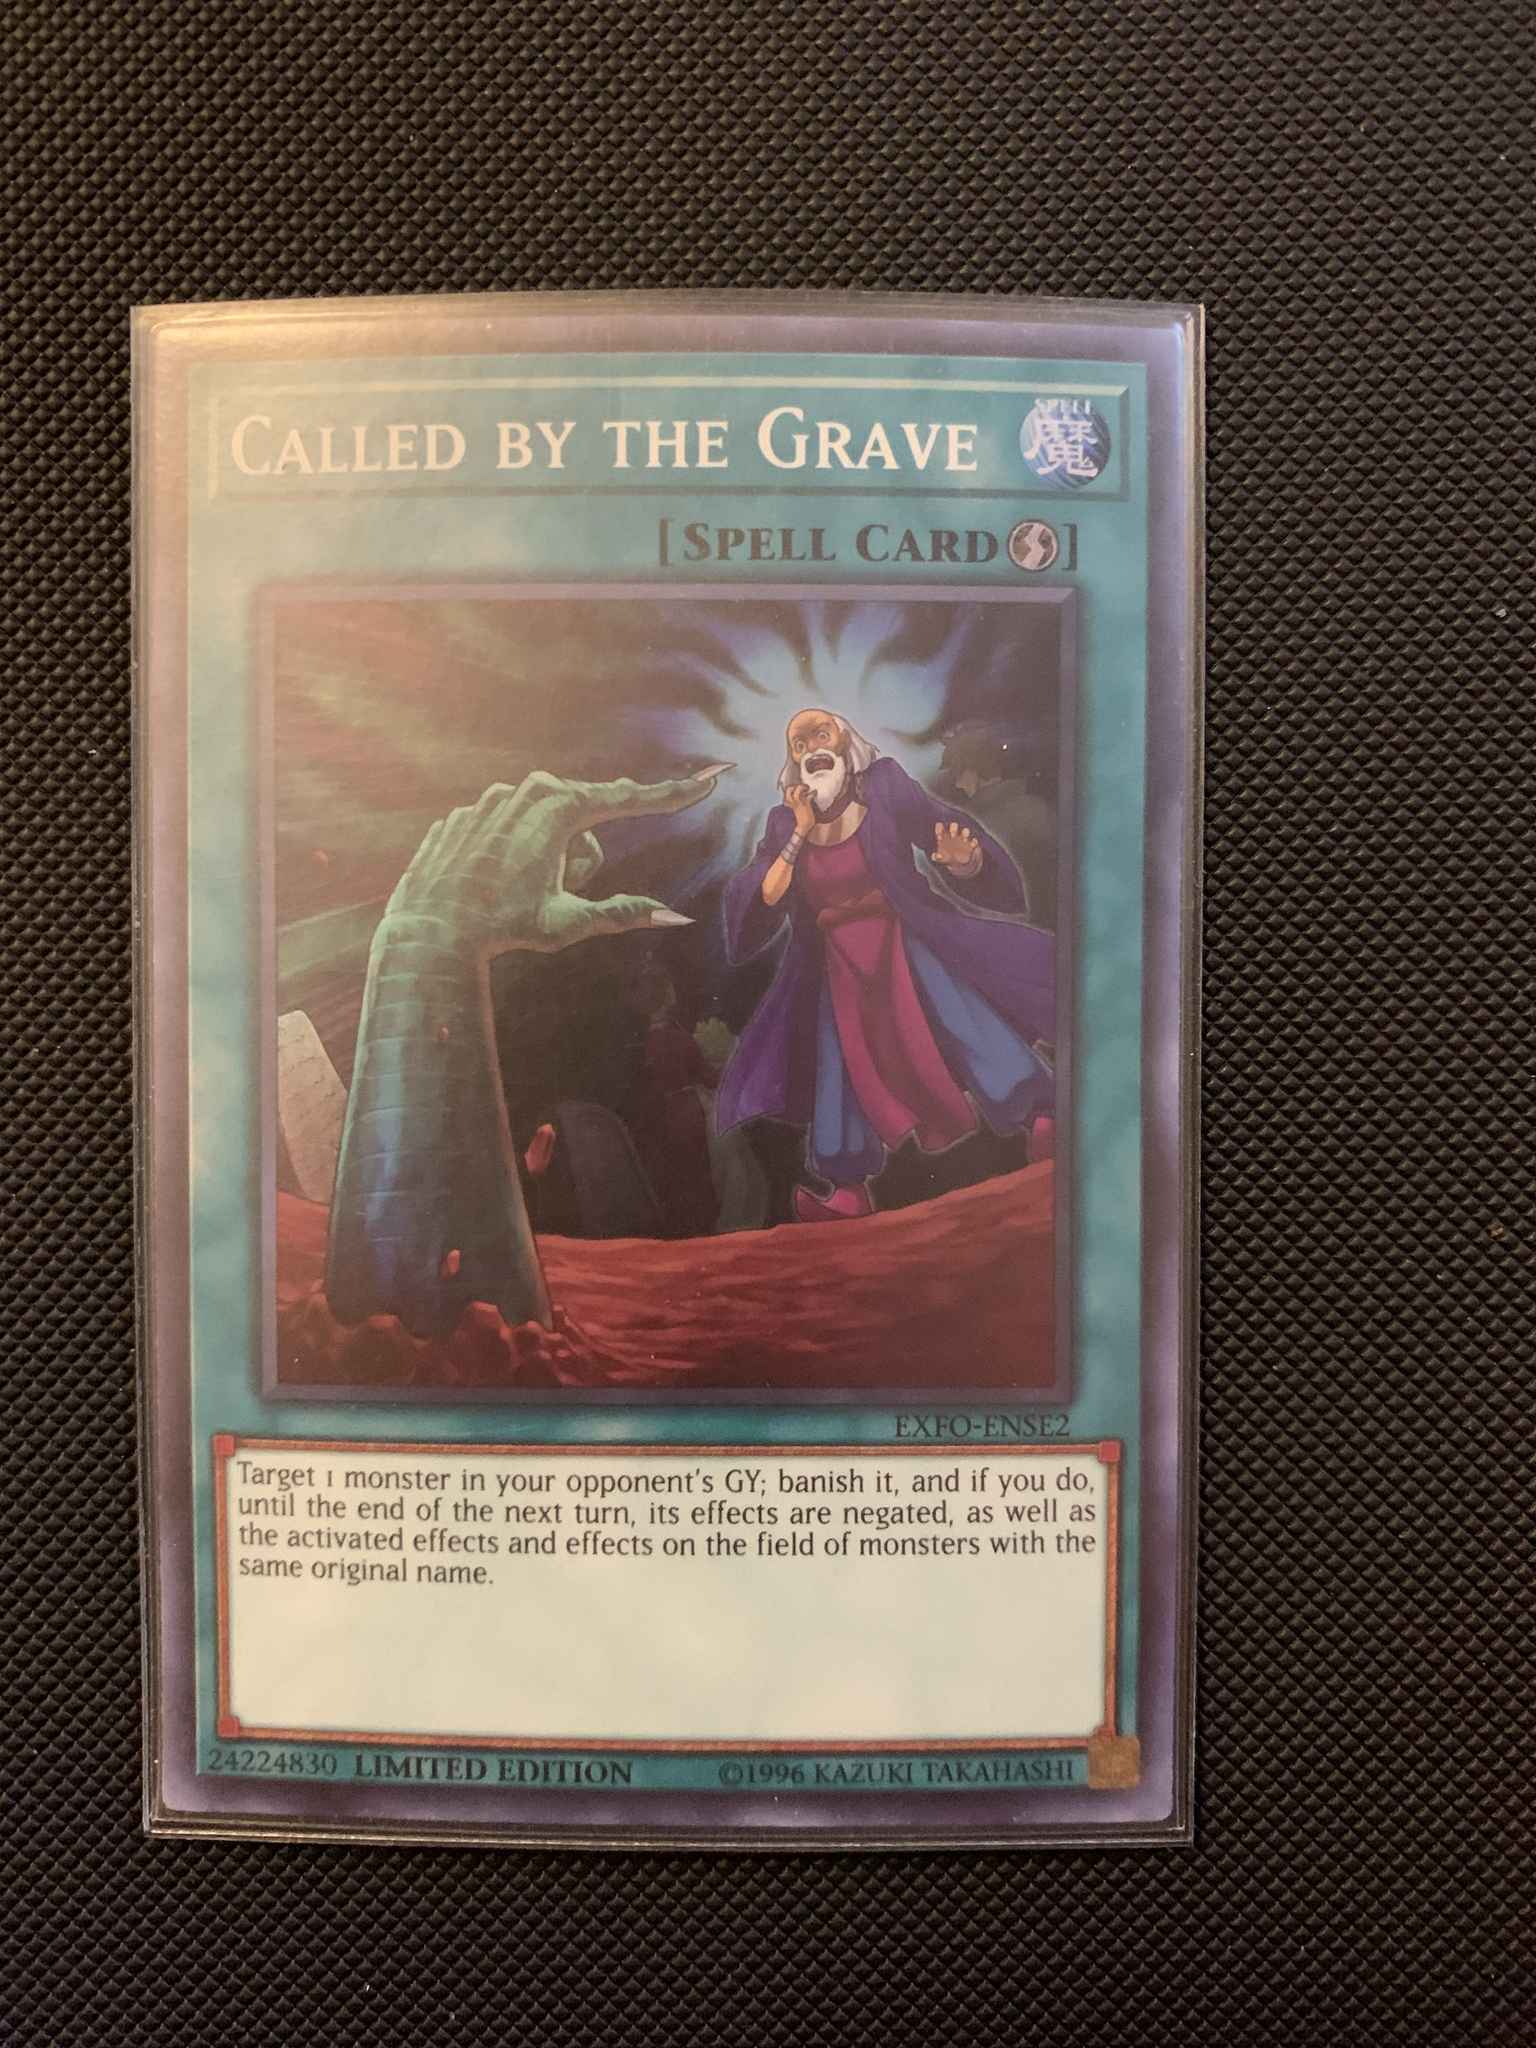 Called By The Grave Super Rare EXFO-ENSE2 Near Mint